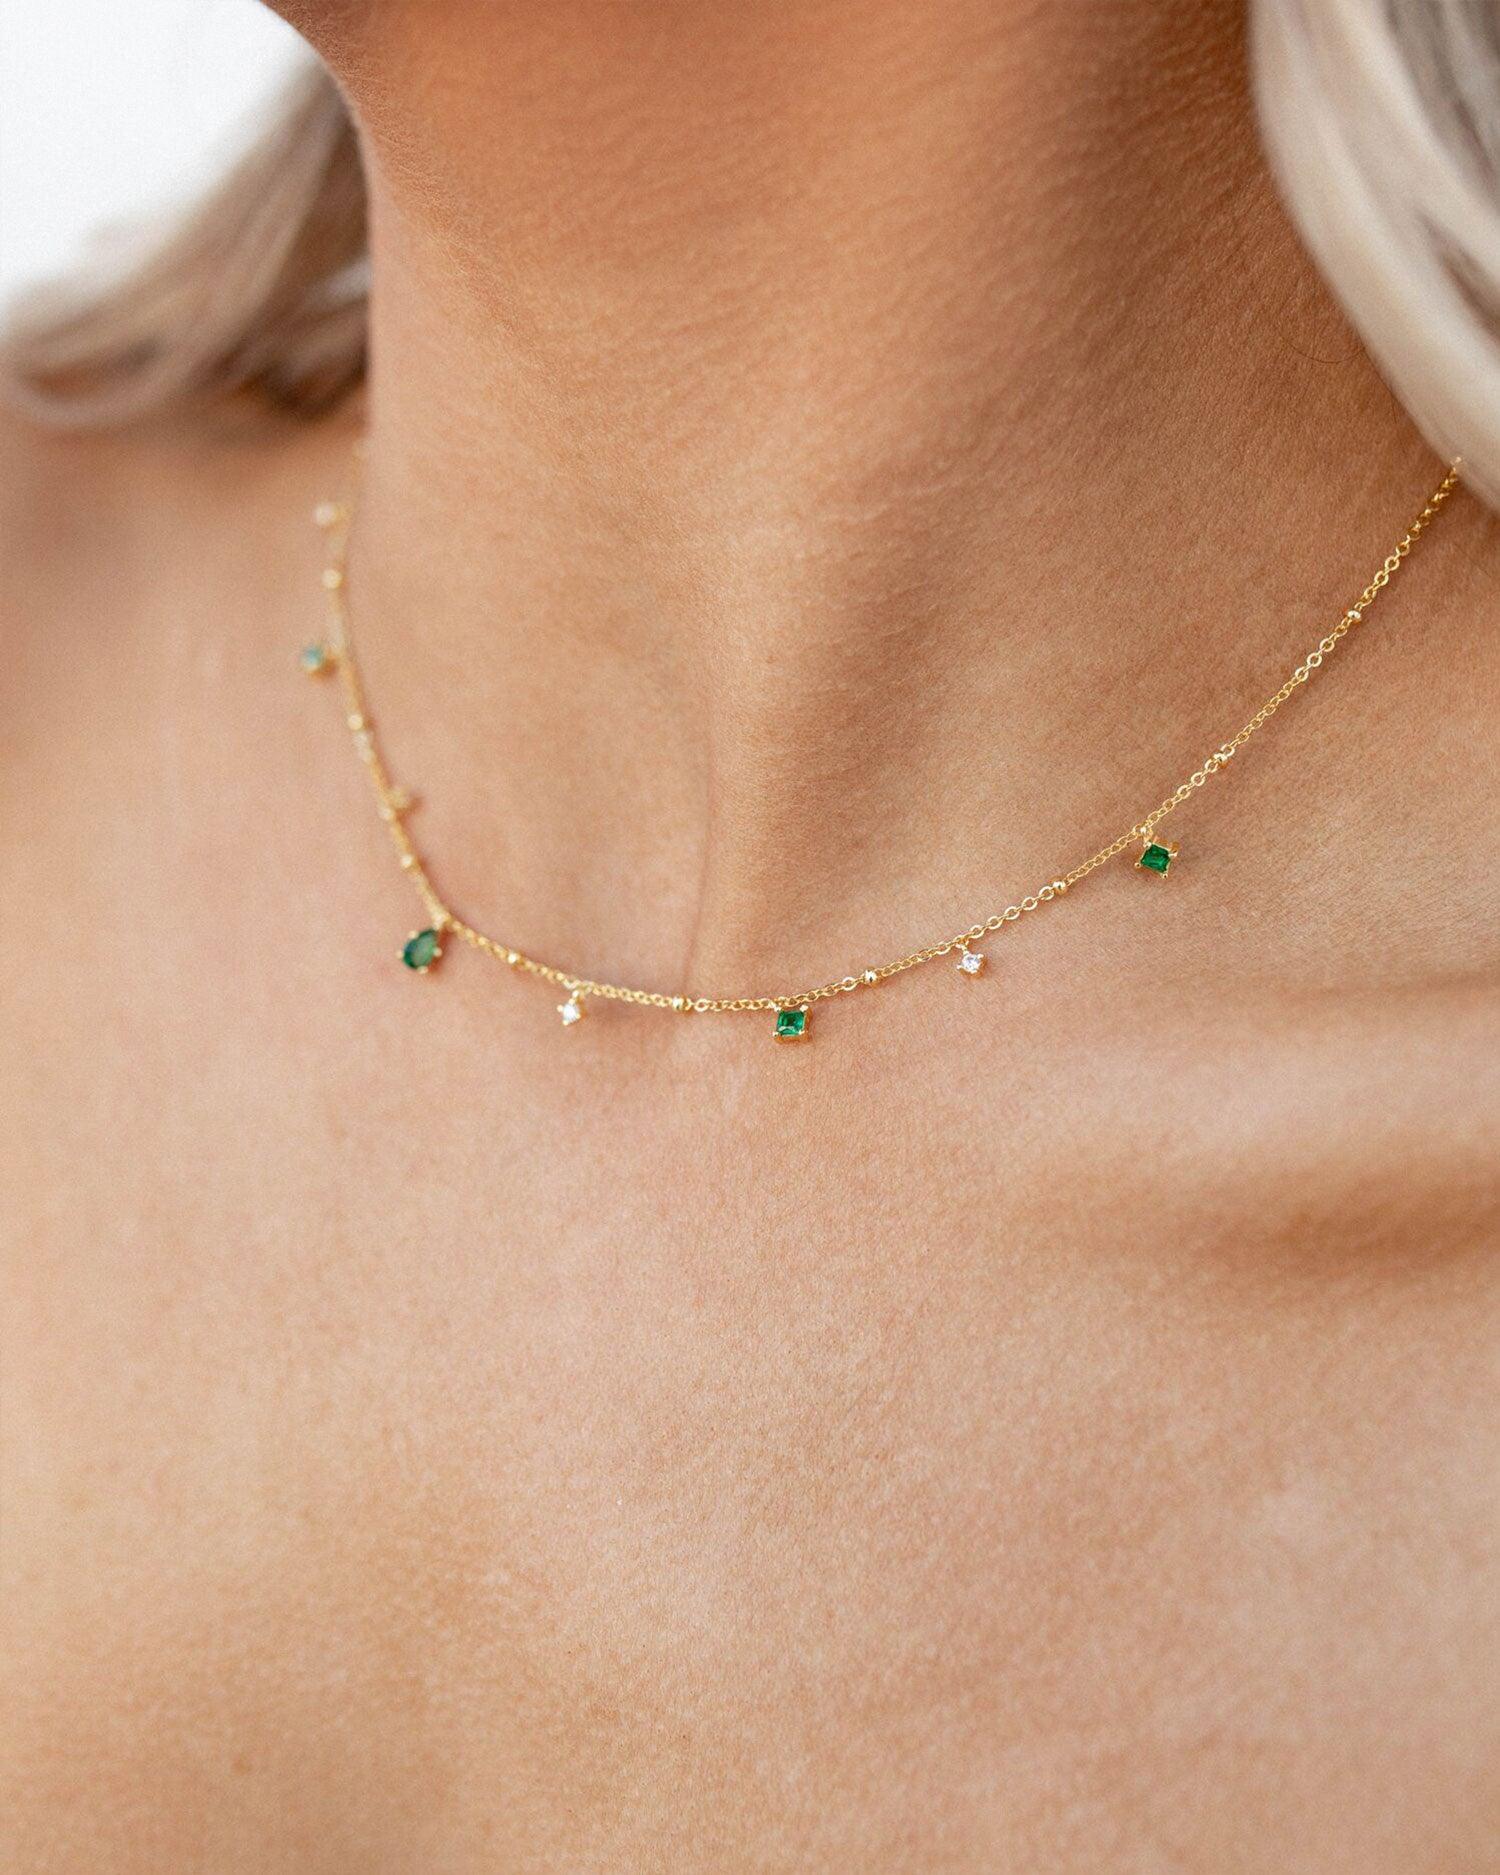 Elysee Necklace in Emerald Green - En Route Jewelry